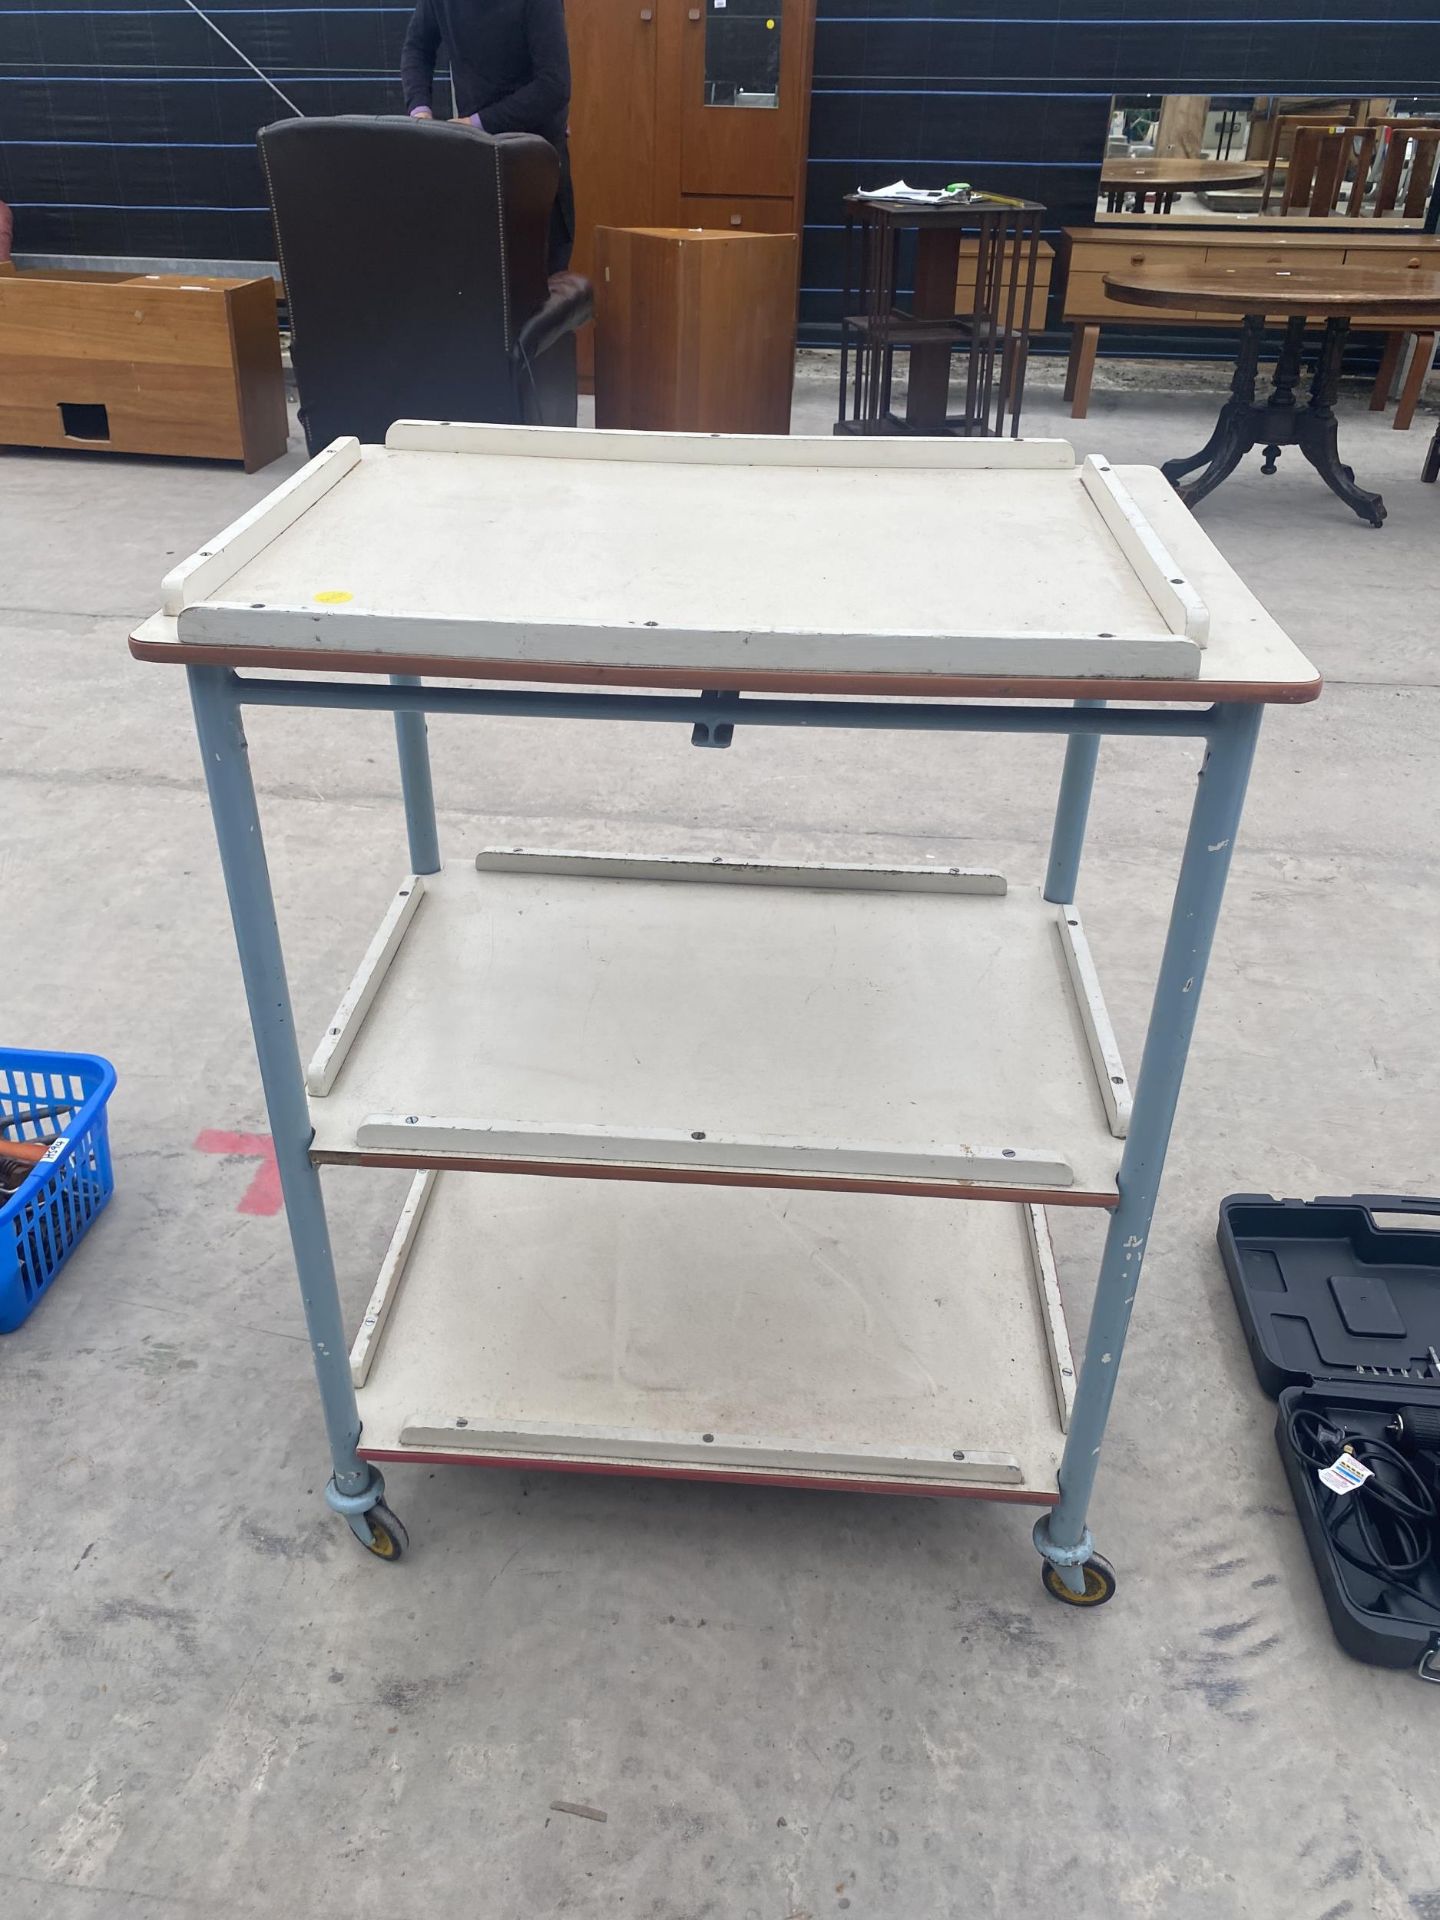 A VINTAGE AND RETRO THREE TIER KITCHEN TROLLEY